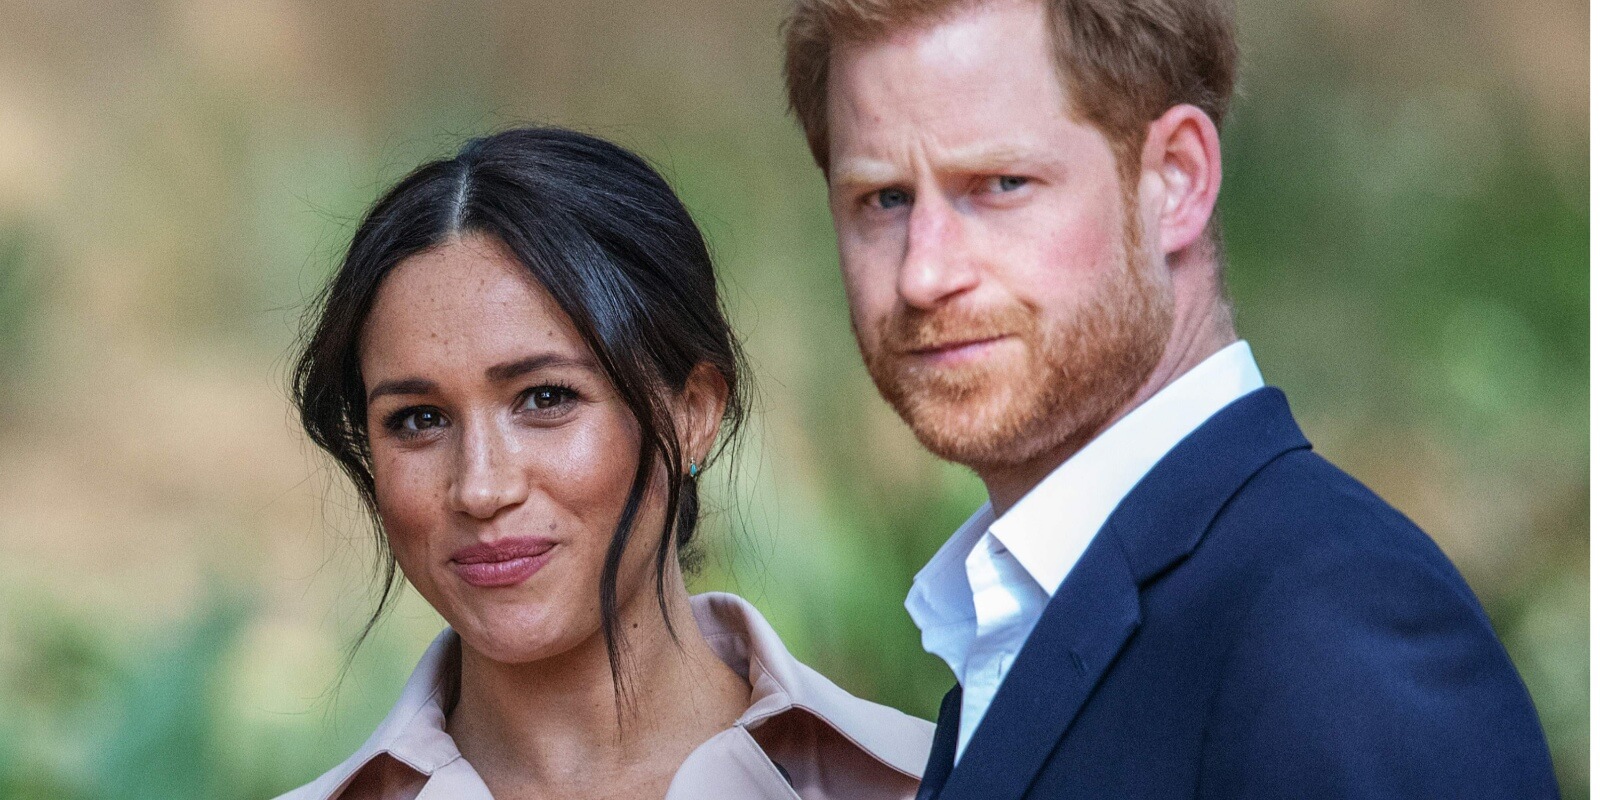 Meghan Markle and Prince Harry pose for photographers in 2019.